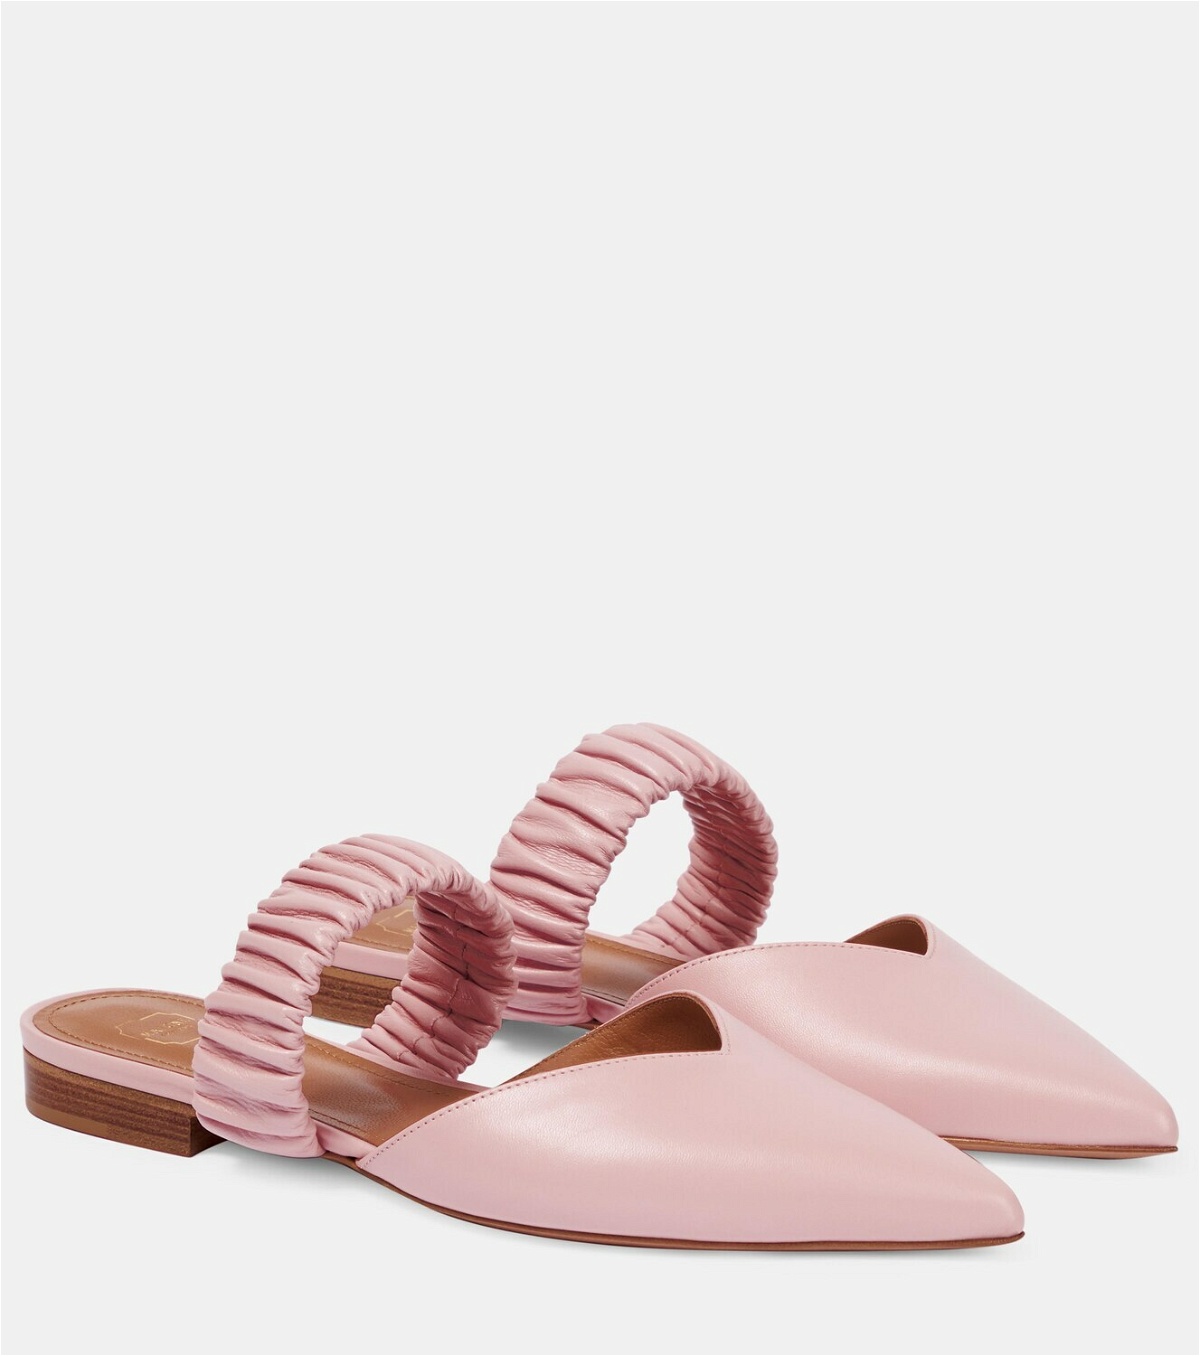 Malone Souliers Matilda leather slippers Malone Souliers